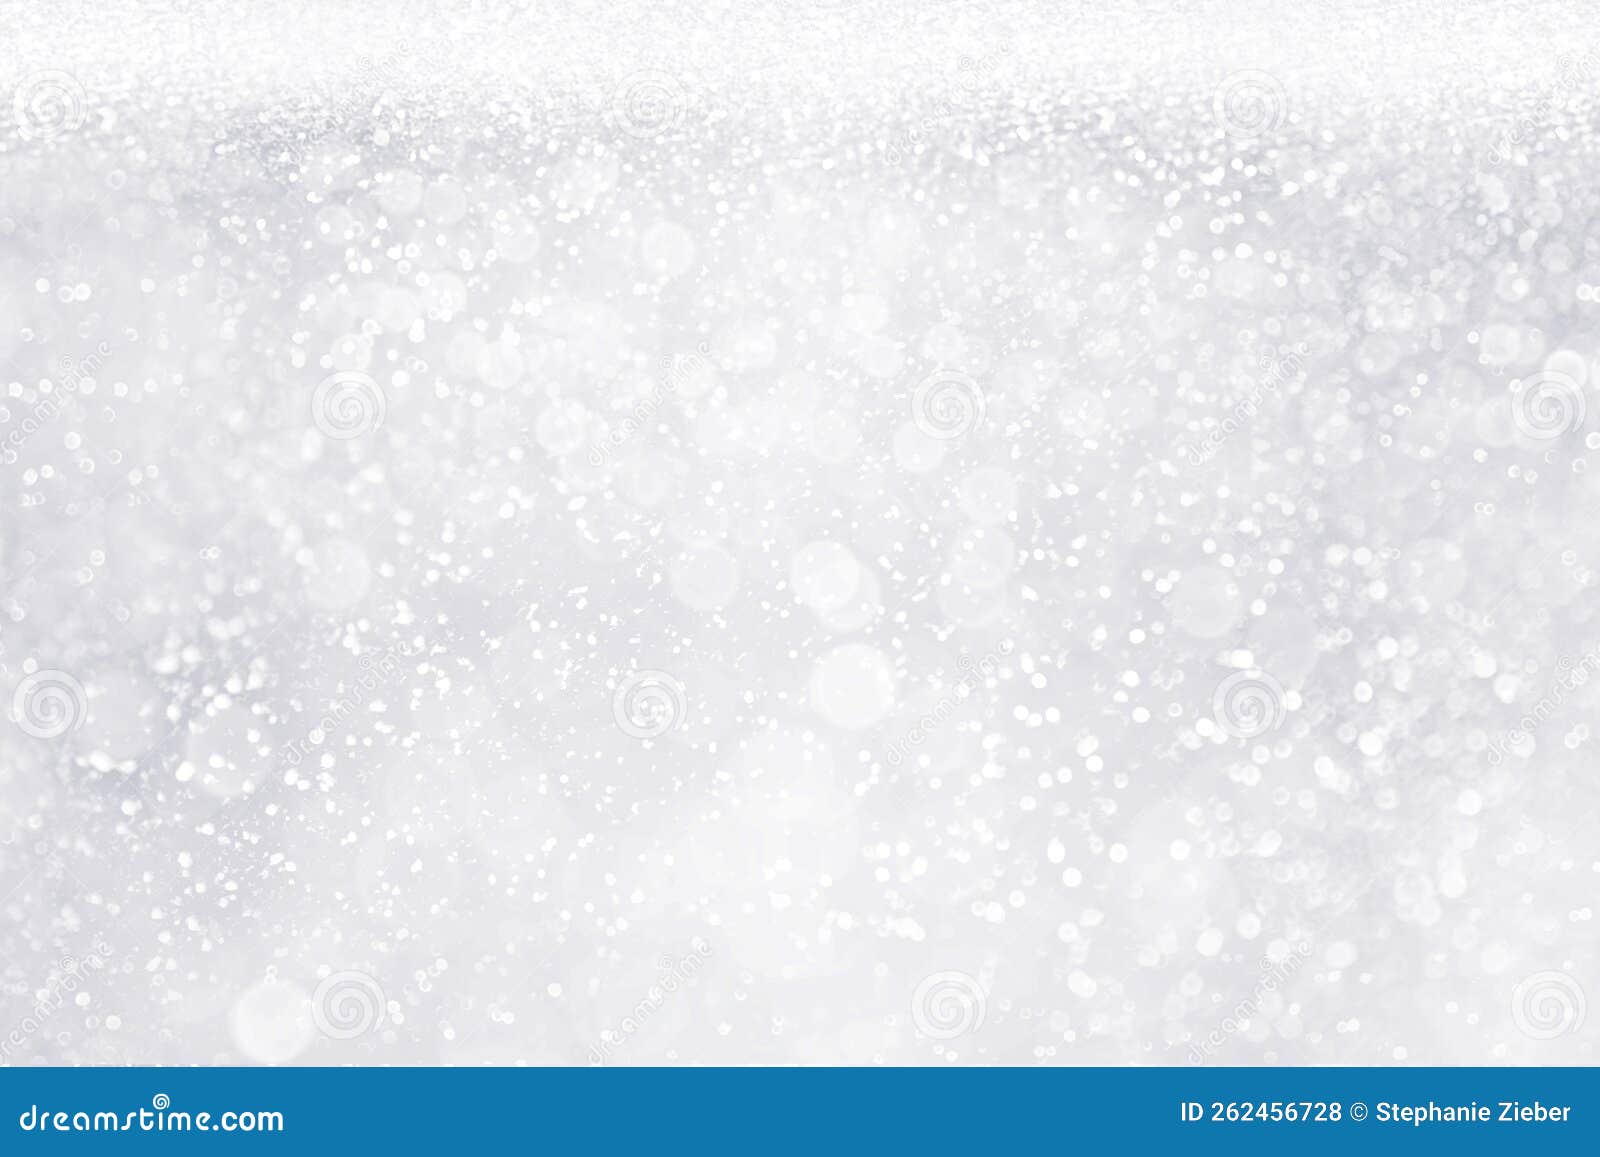 Silver White Diamond Jewelry Background Or Christmas Snow Glitter Stock  Photo - Download Image Now - iStock